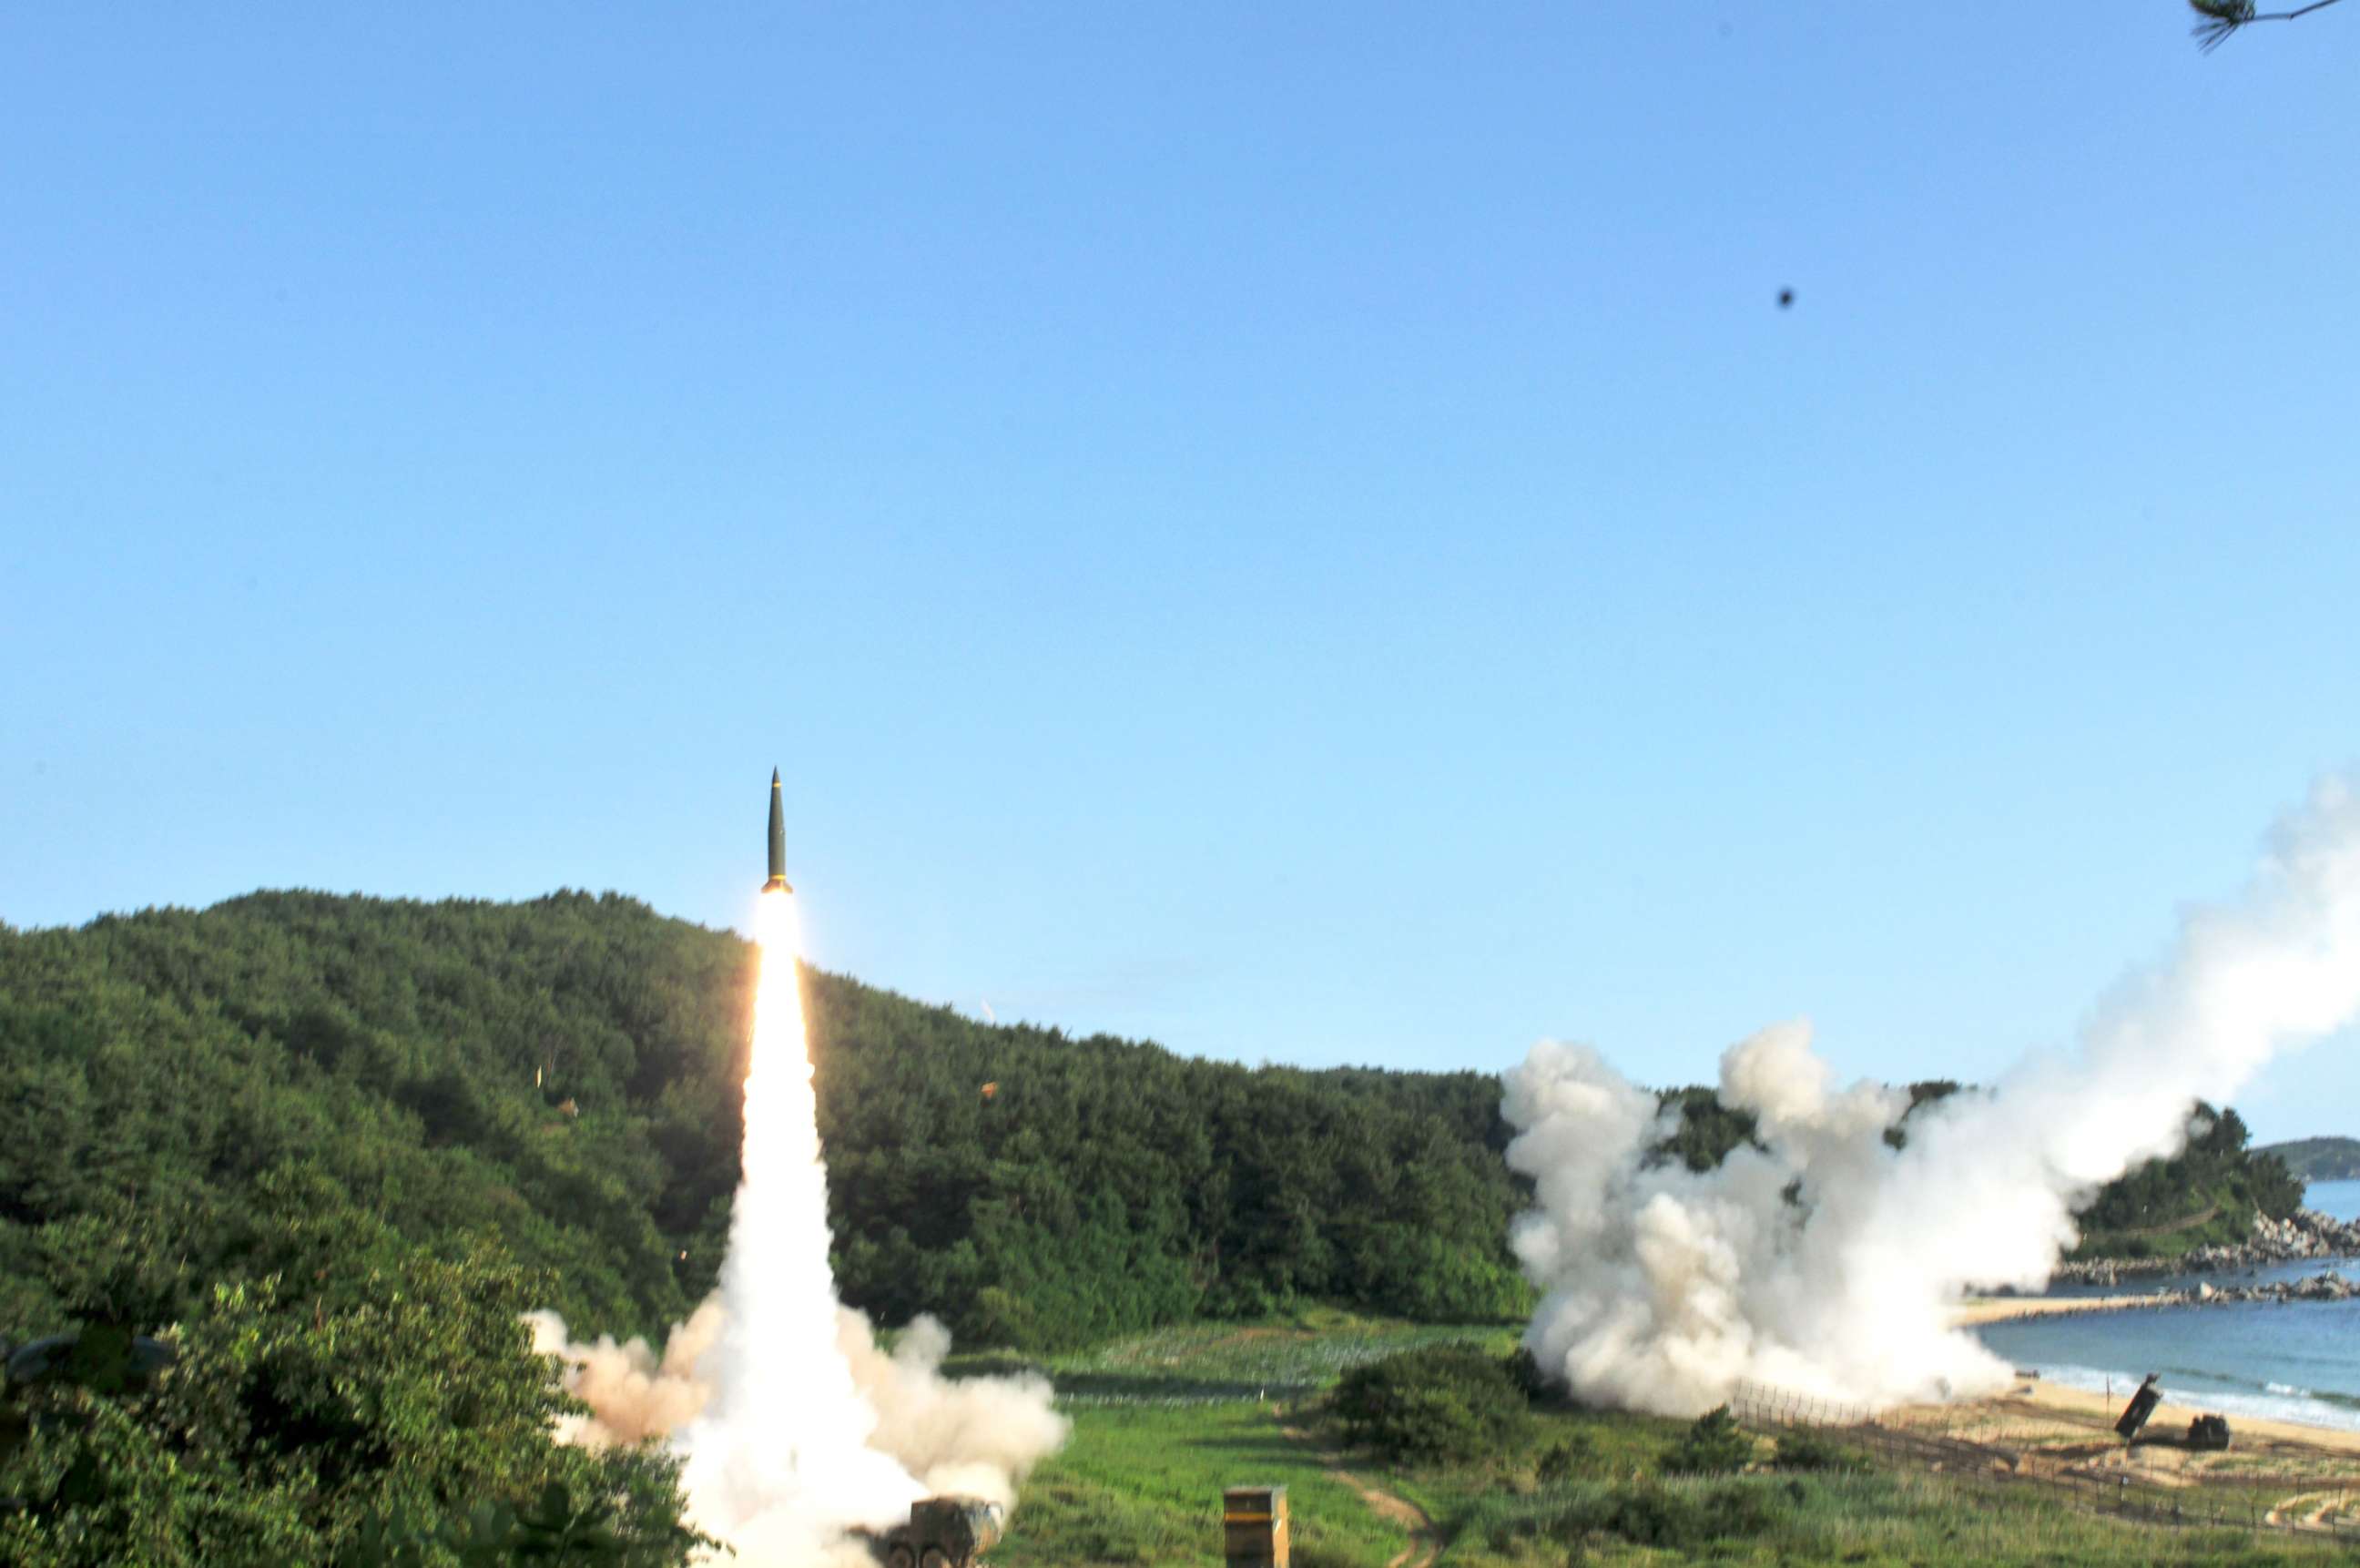 PHOTO: The U.S. Army released images from the U.S. and South Korea's missile launches into the Sea of Japan in response to the North Korean missile launch, July 4, 2017.